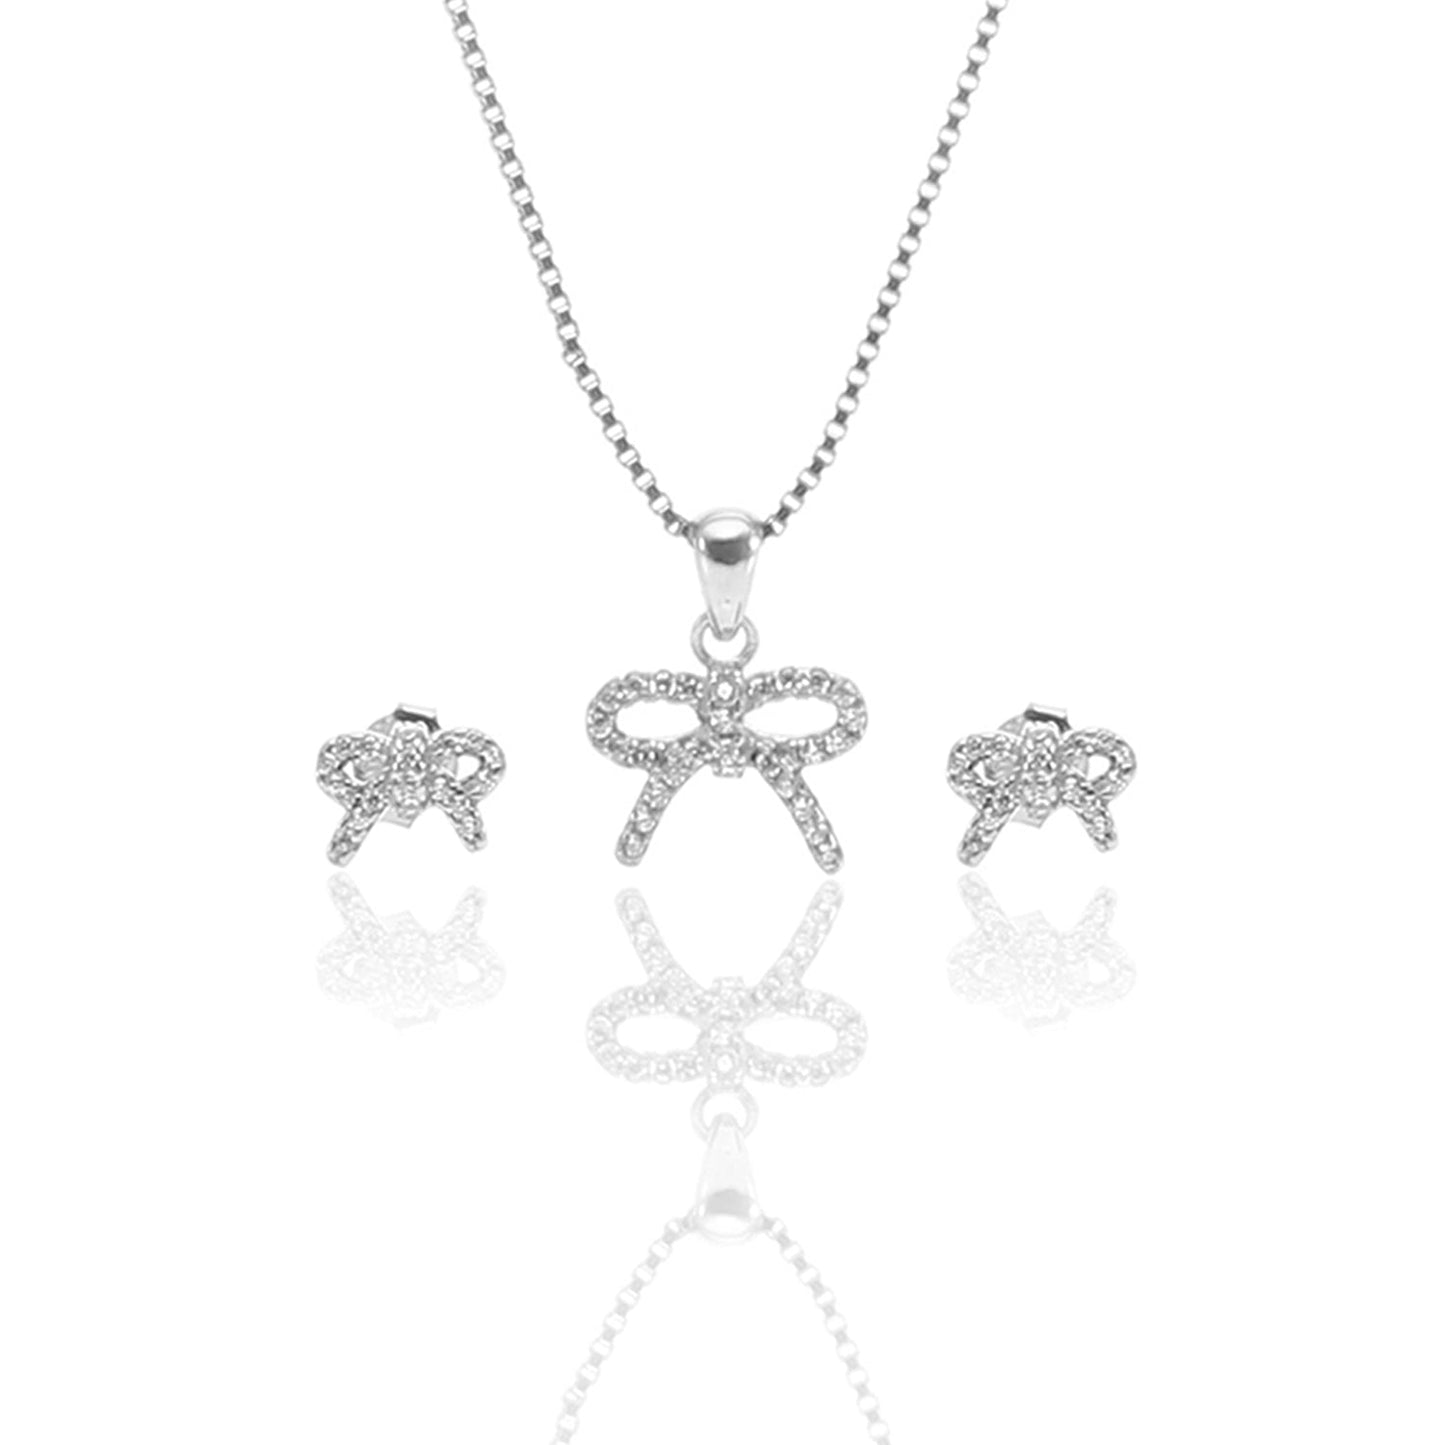 Sparkling Bow Pendant Necklace and Earrings Set - ARJW1010RD ARCADIO